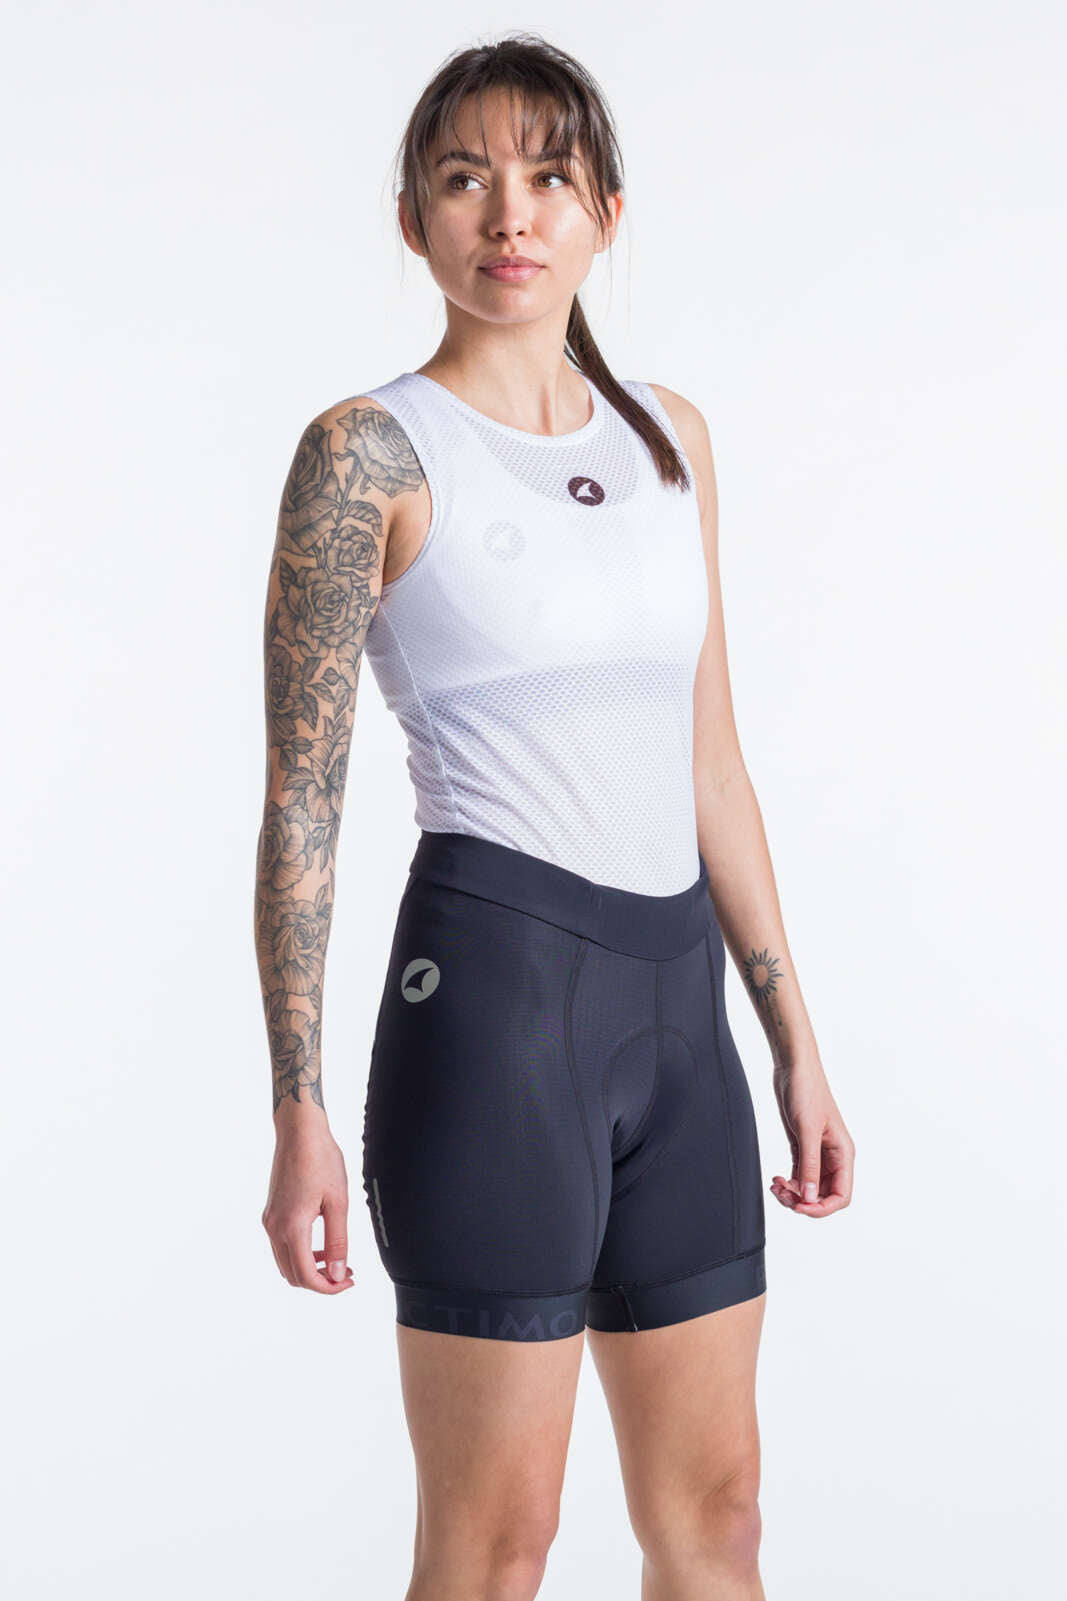 Women's Mesh Sleeveless Cycling Base Layer - Front View